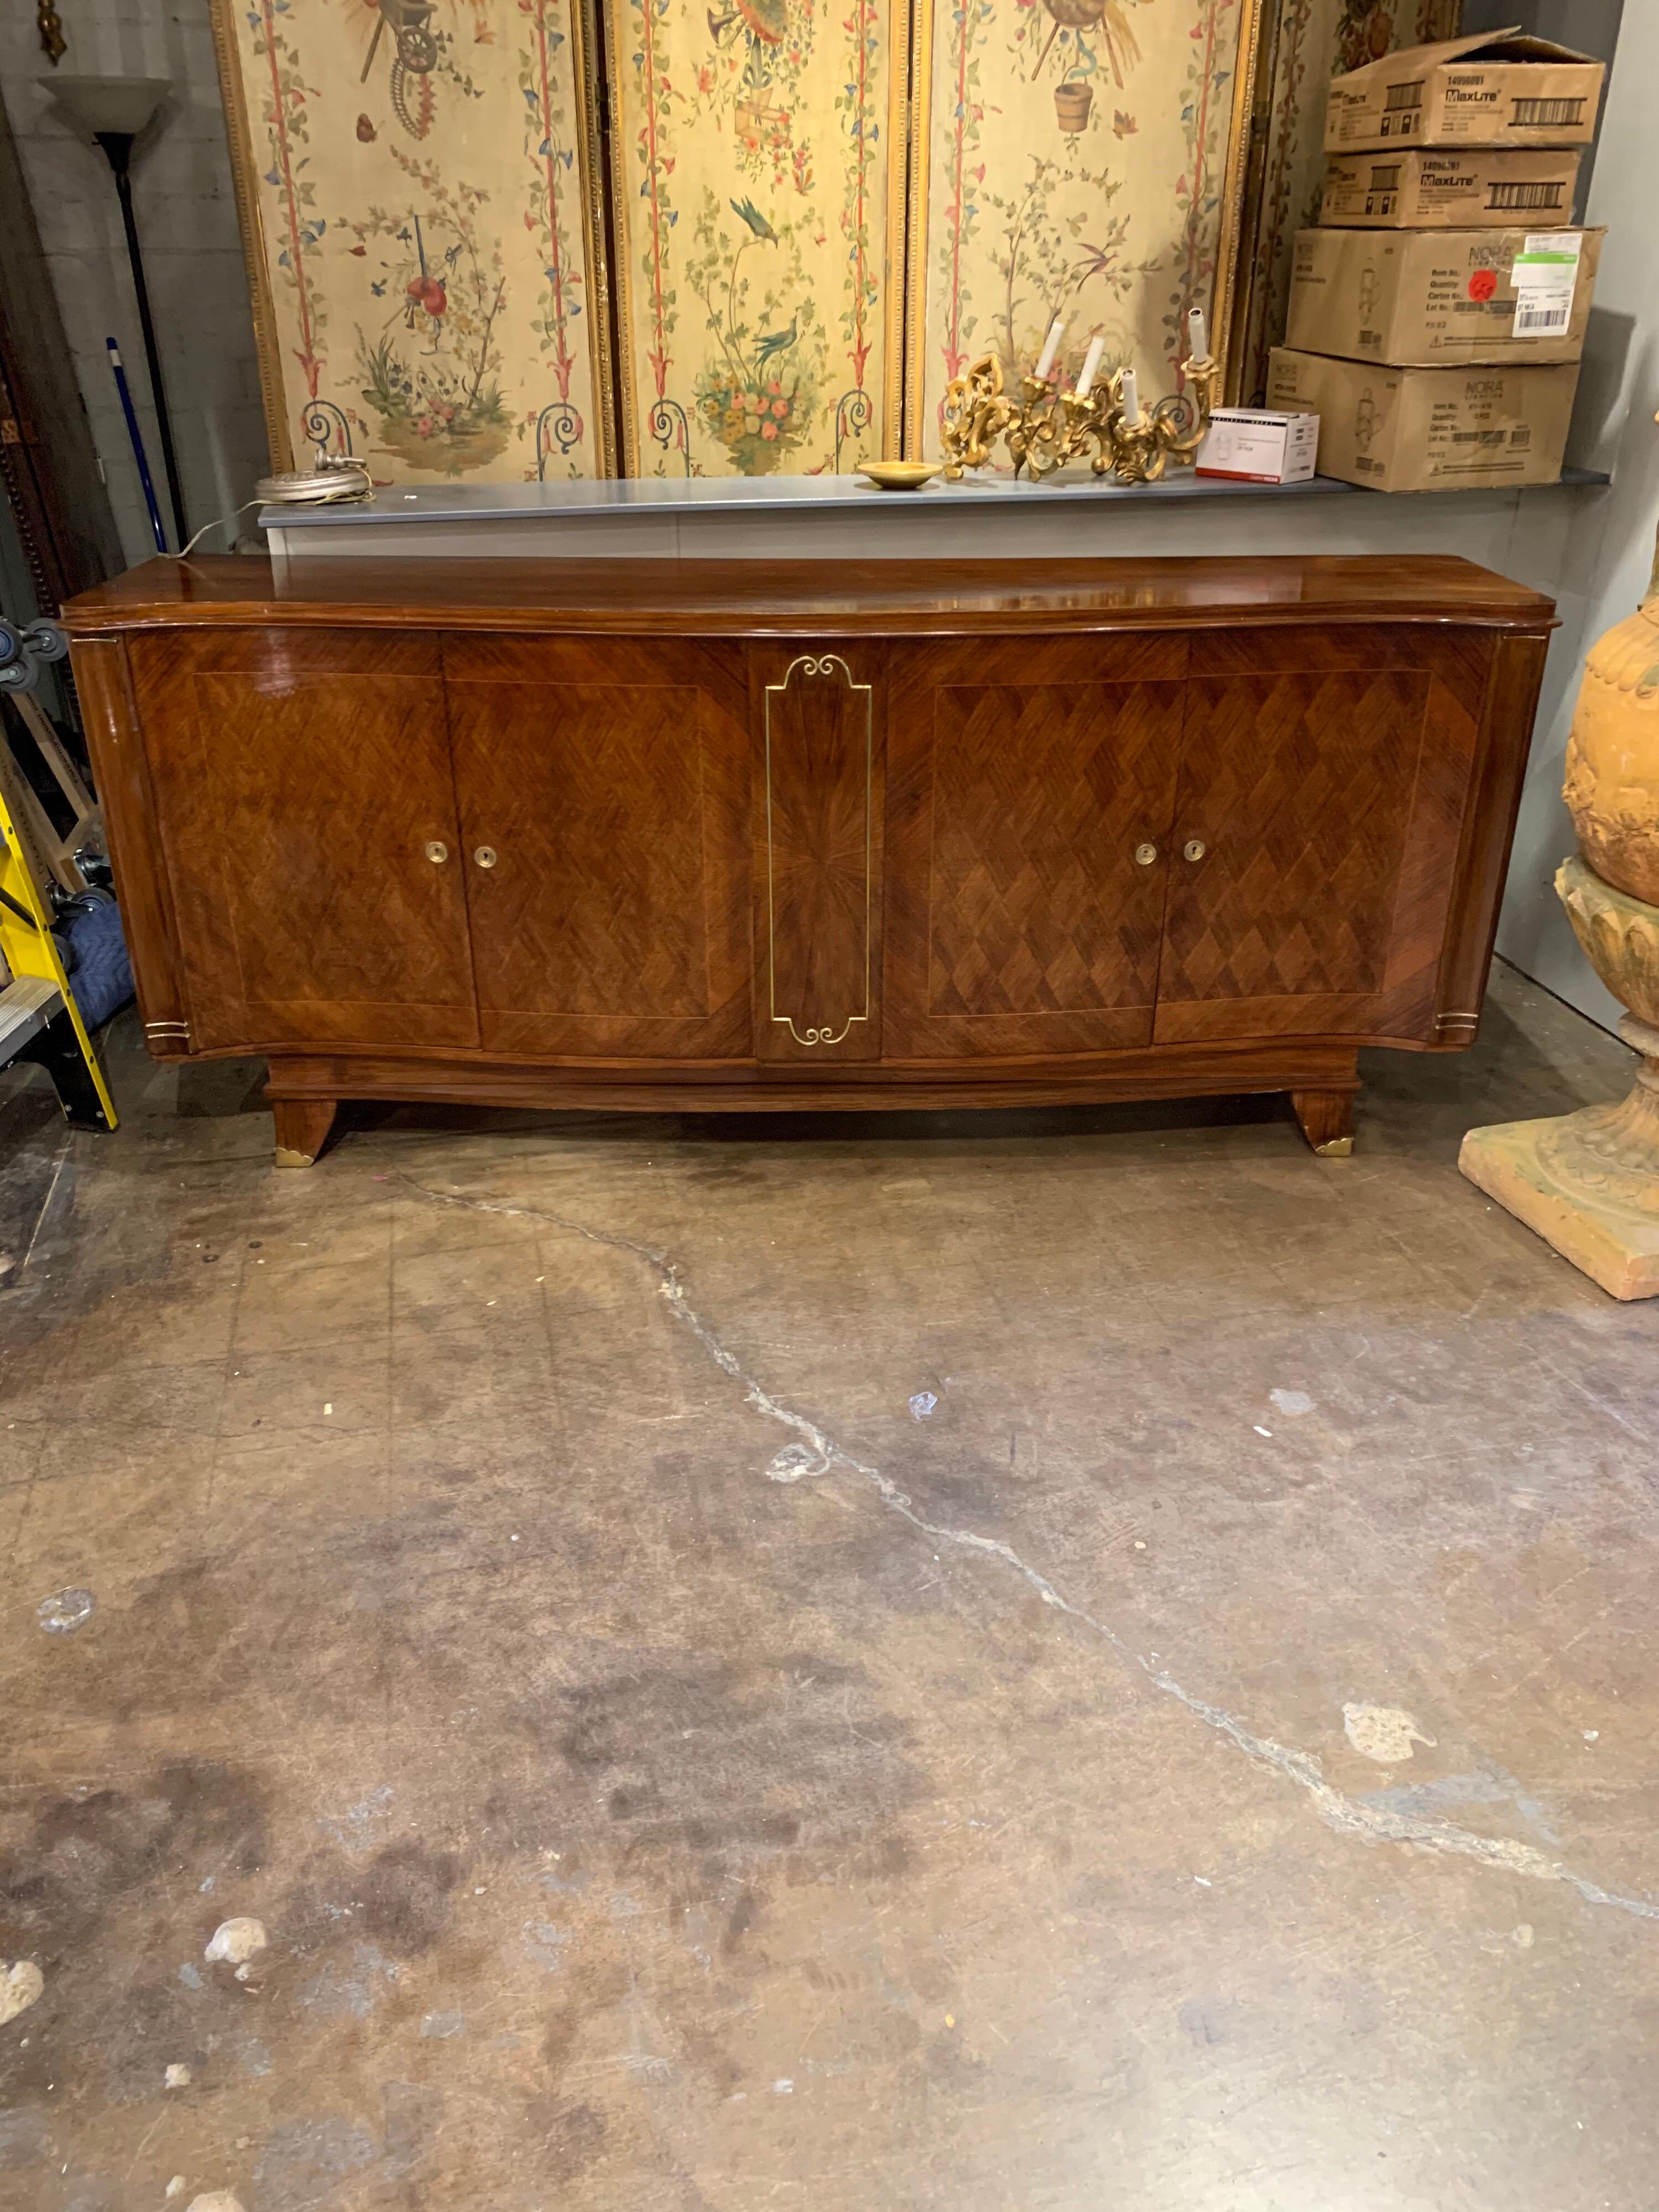 Superb French midcentury shaped mahogany sideboard with beautiful parquetry design. Lovely brass hardware as well. Very fine quality with loads of storage and an amazing finish!